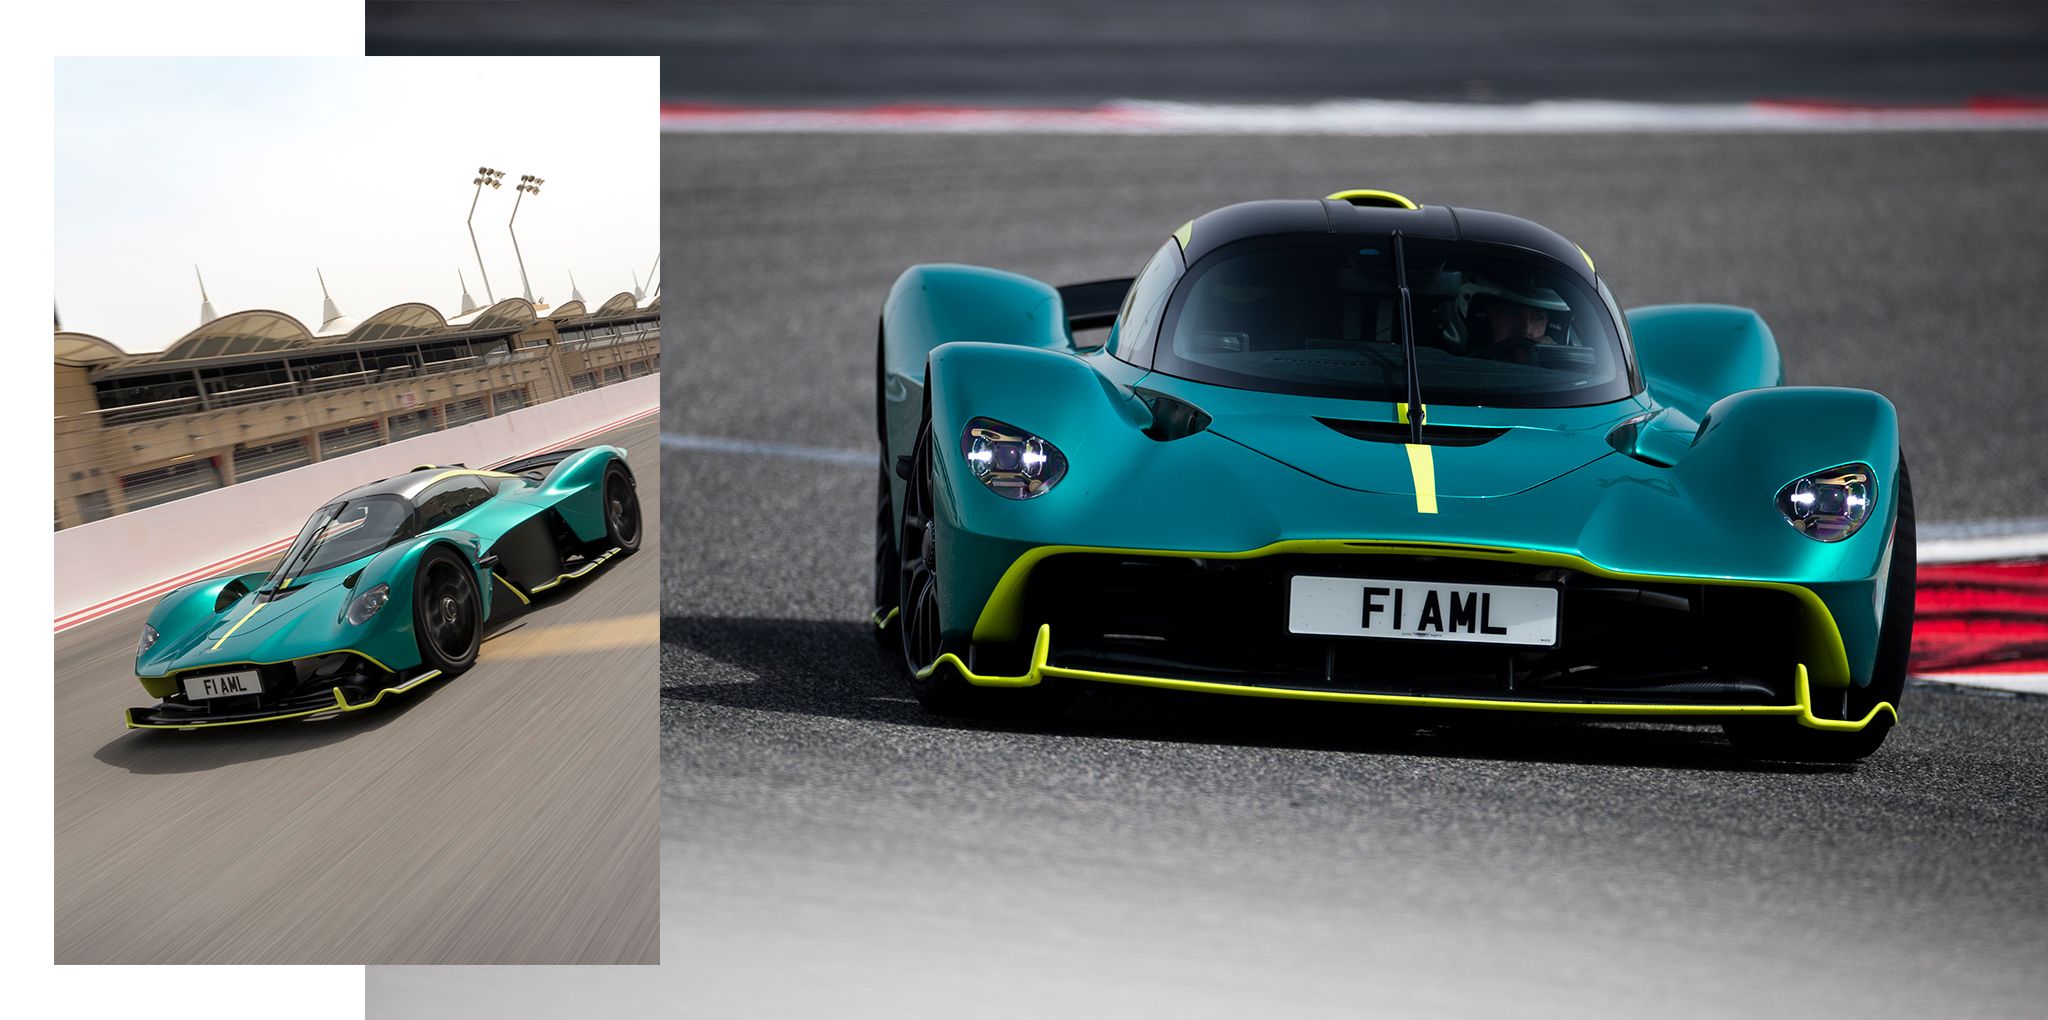 Aston Martin Valkyrie Is the Most Extreme Car to Legally Wear License Plates